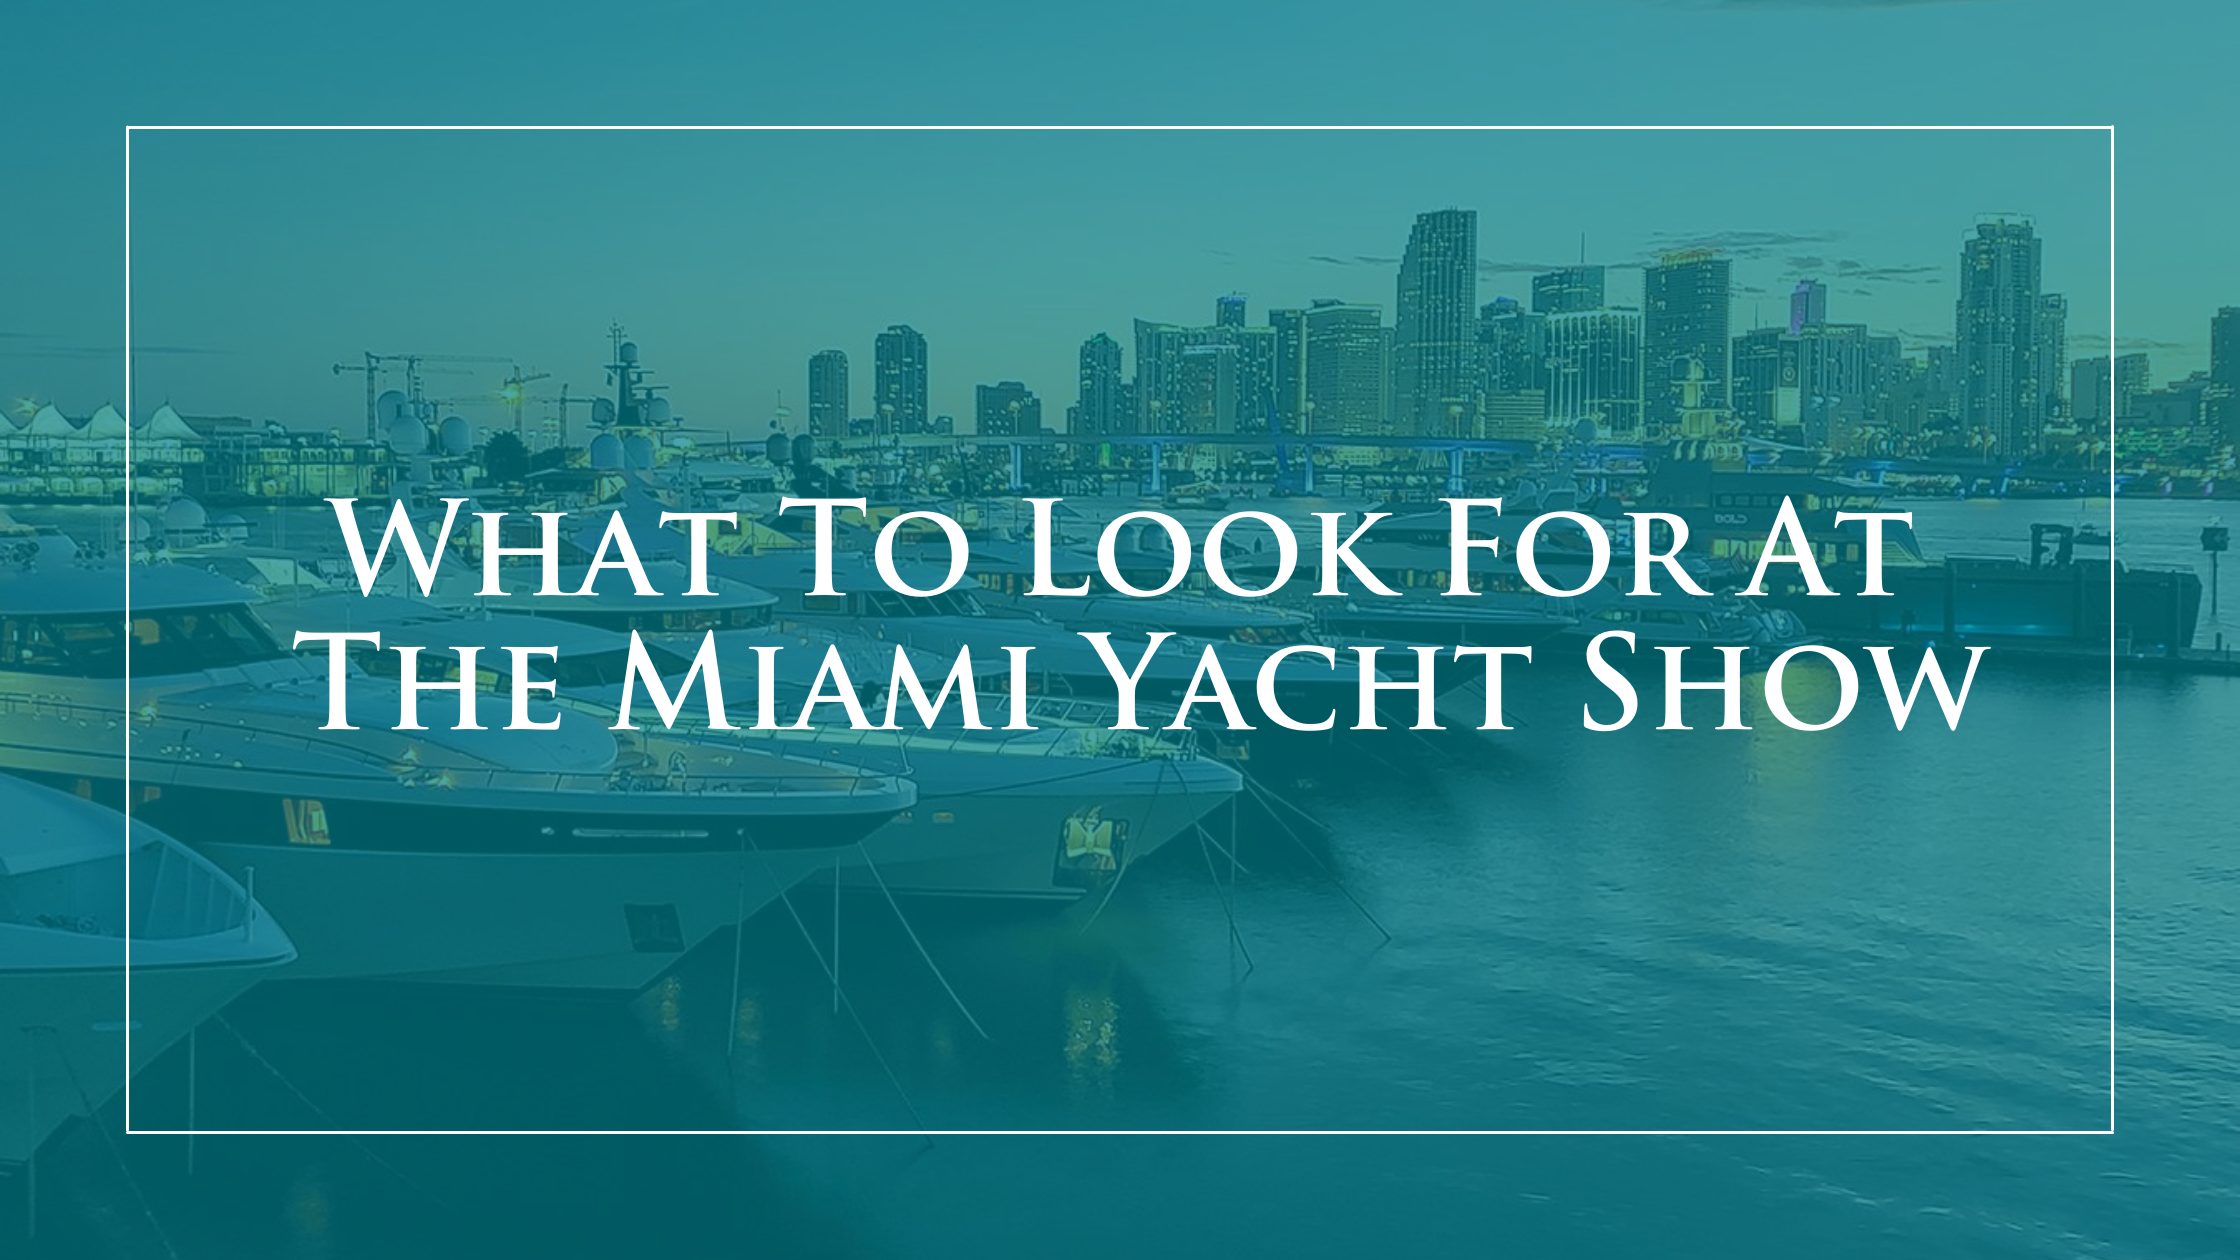 What to Look for at the Miami Yacht Show